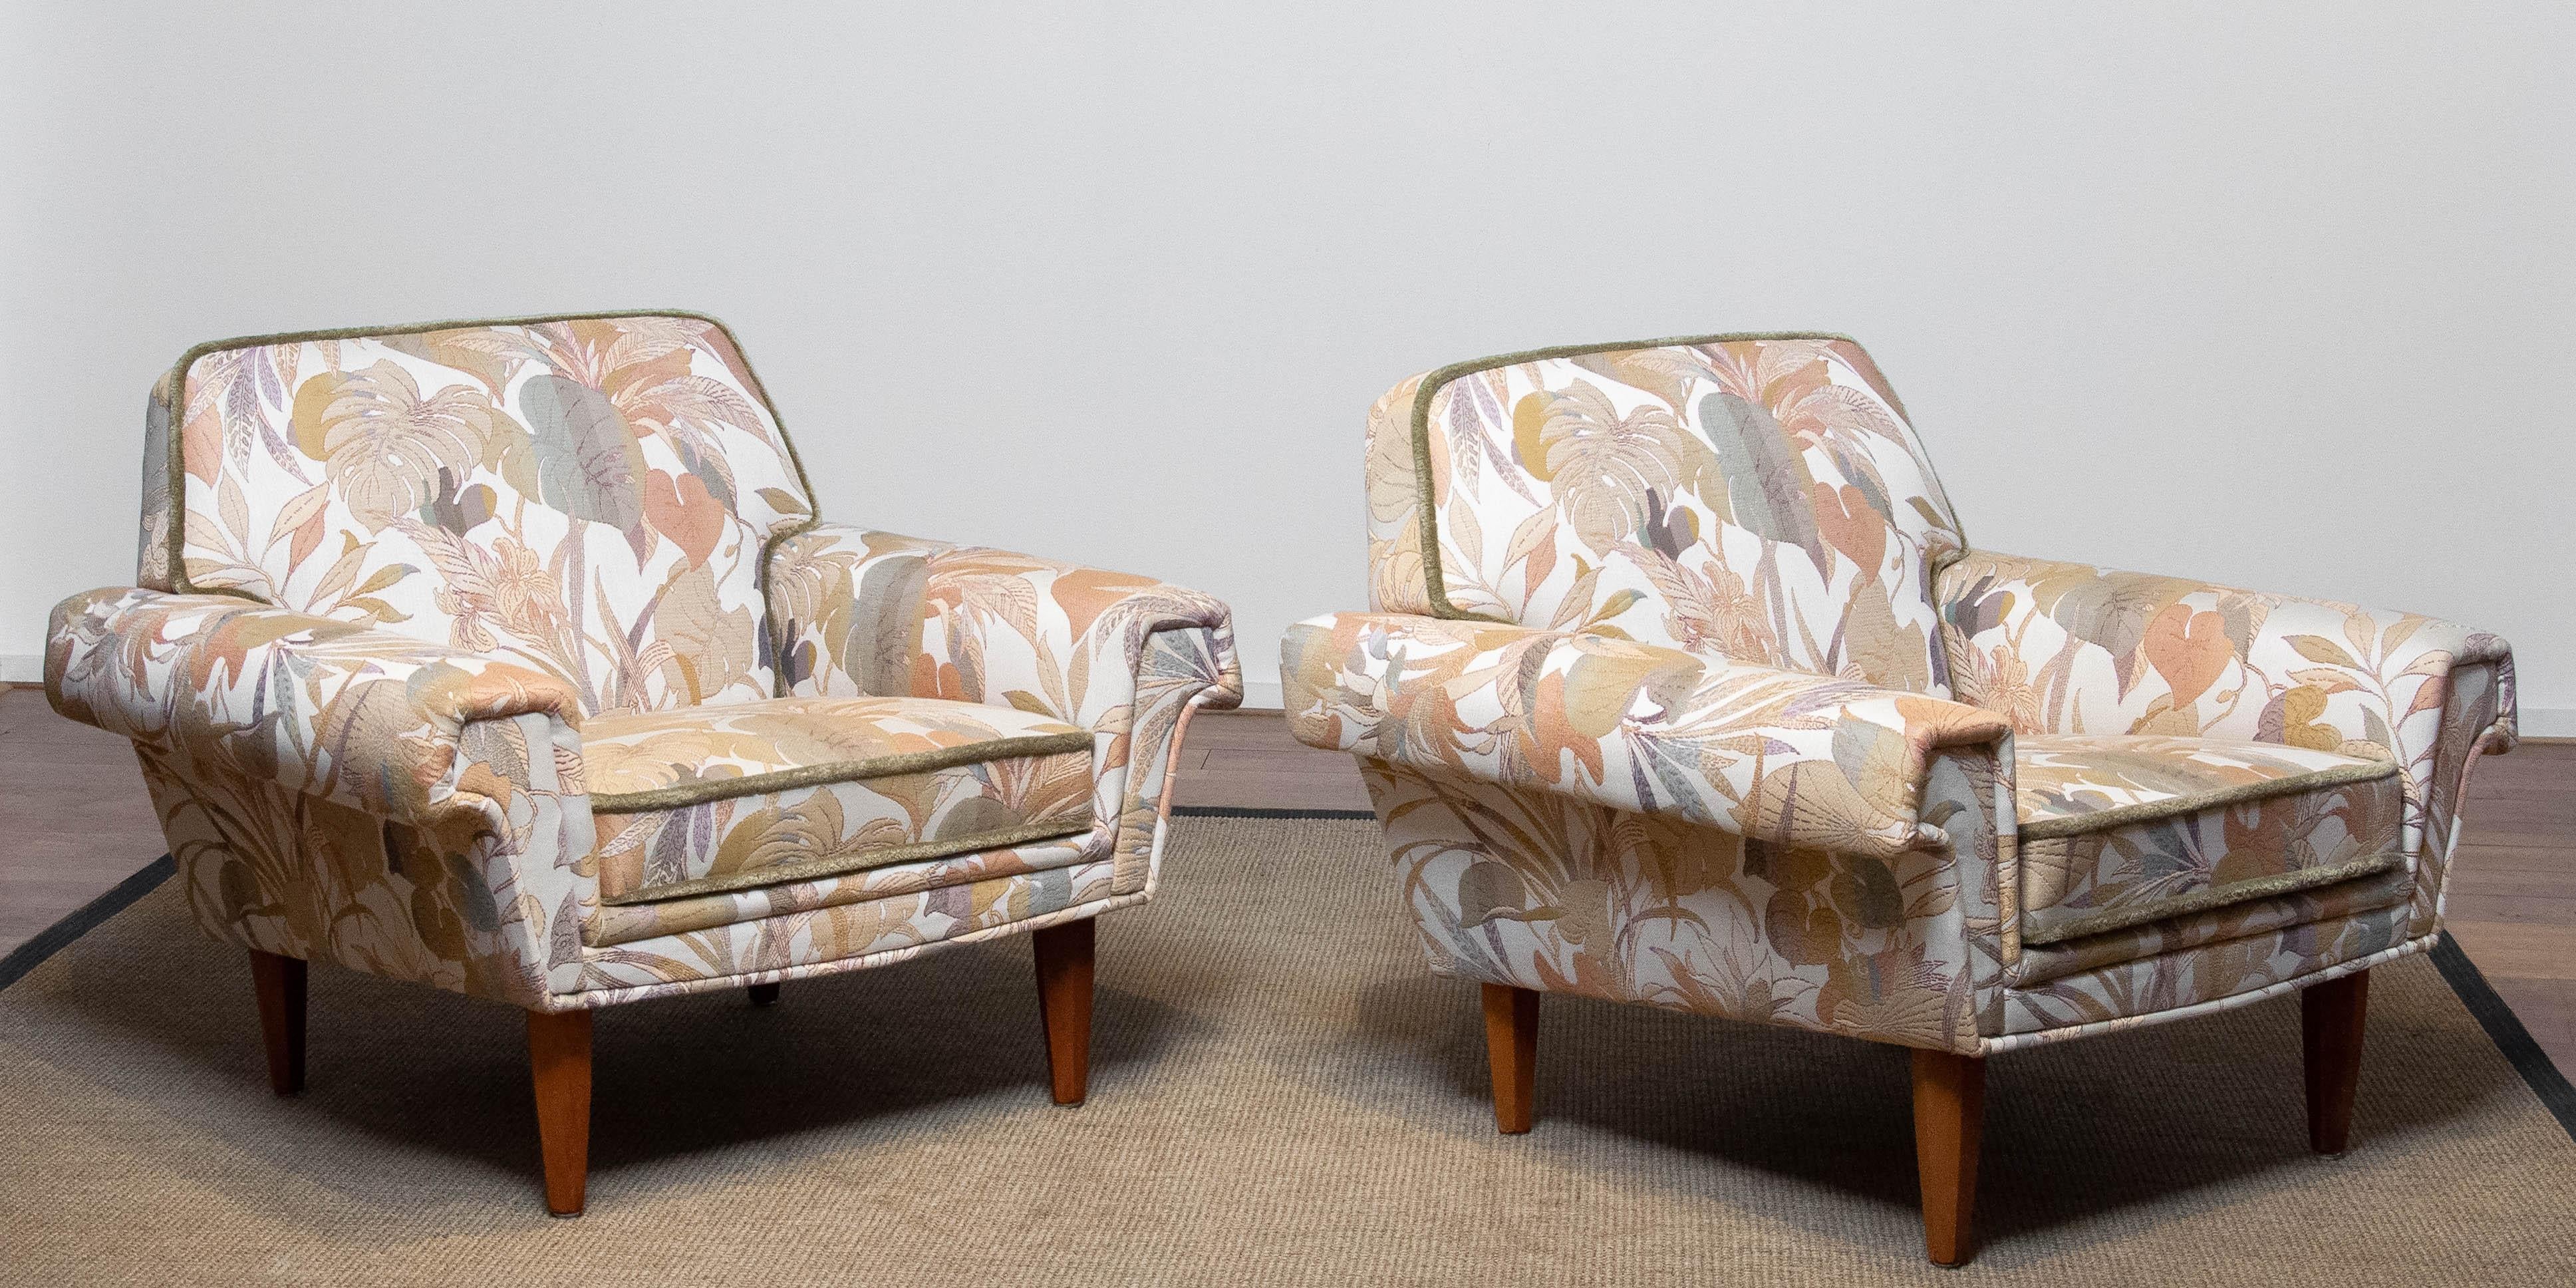 Pair Low Back Lounge Chairs Upholstered Floral Jacquard Fabric From Denmark 1970 For Sale 8